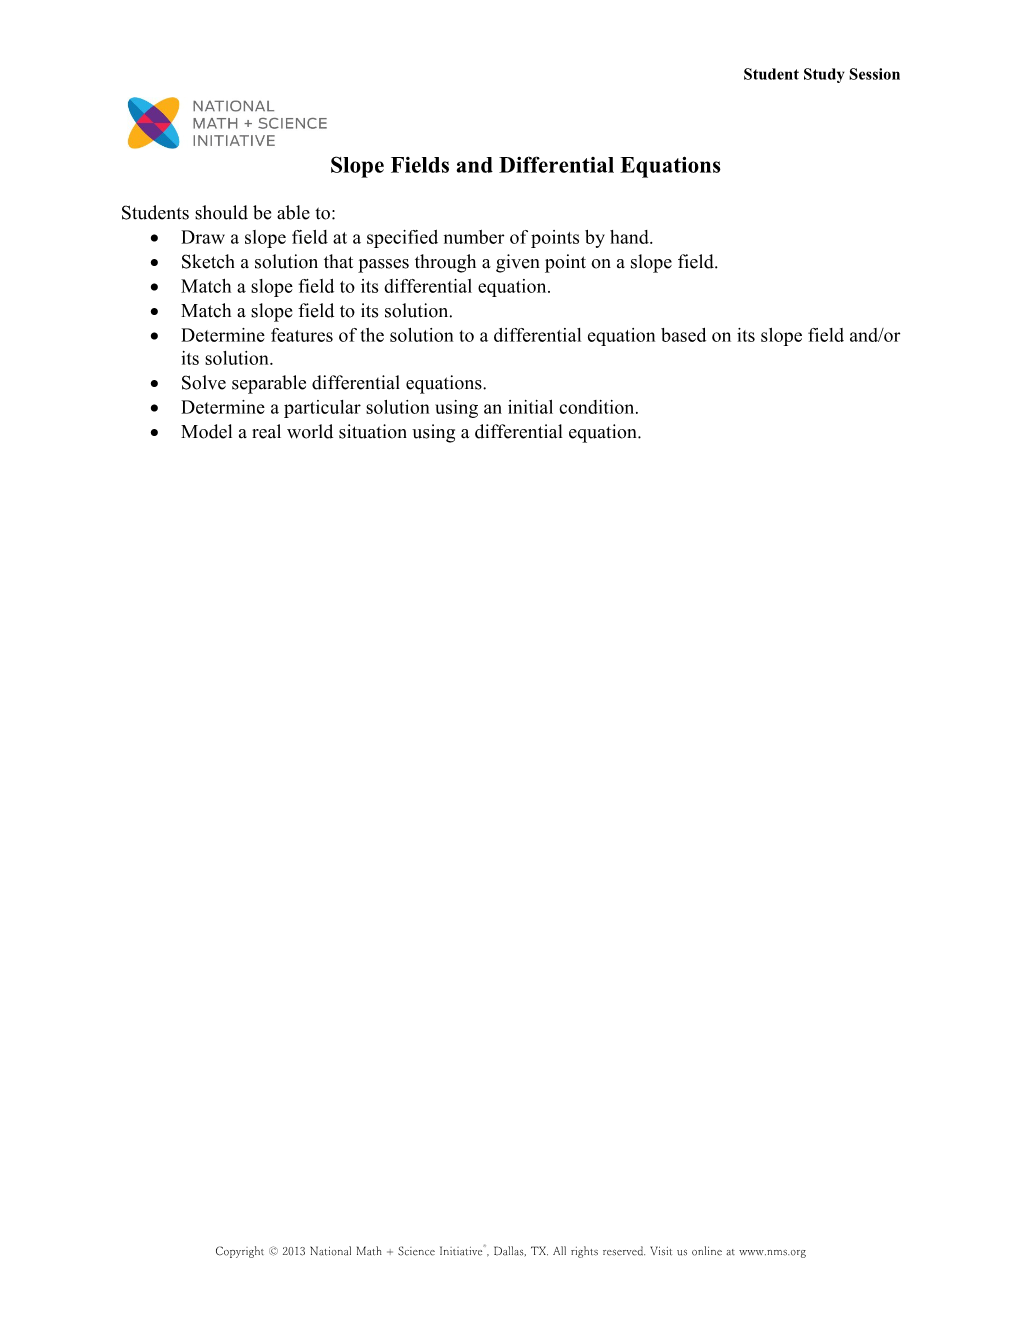 Slope Fields and Differential Equations